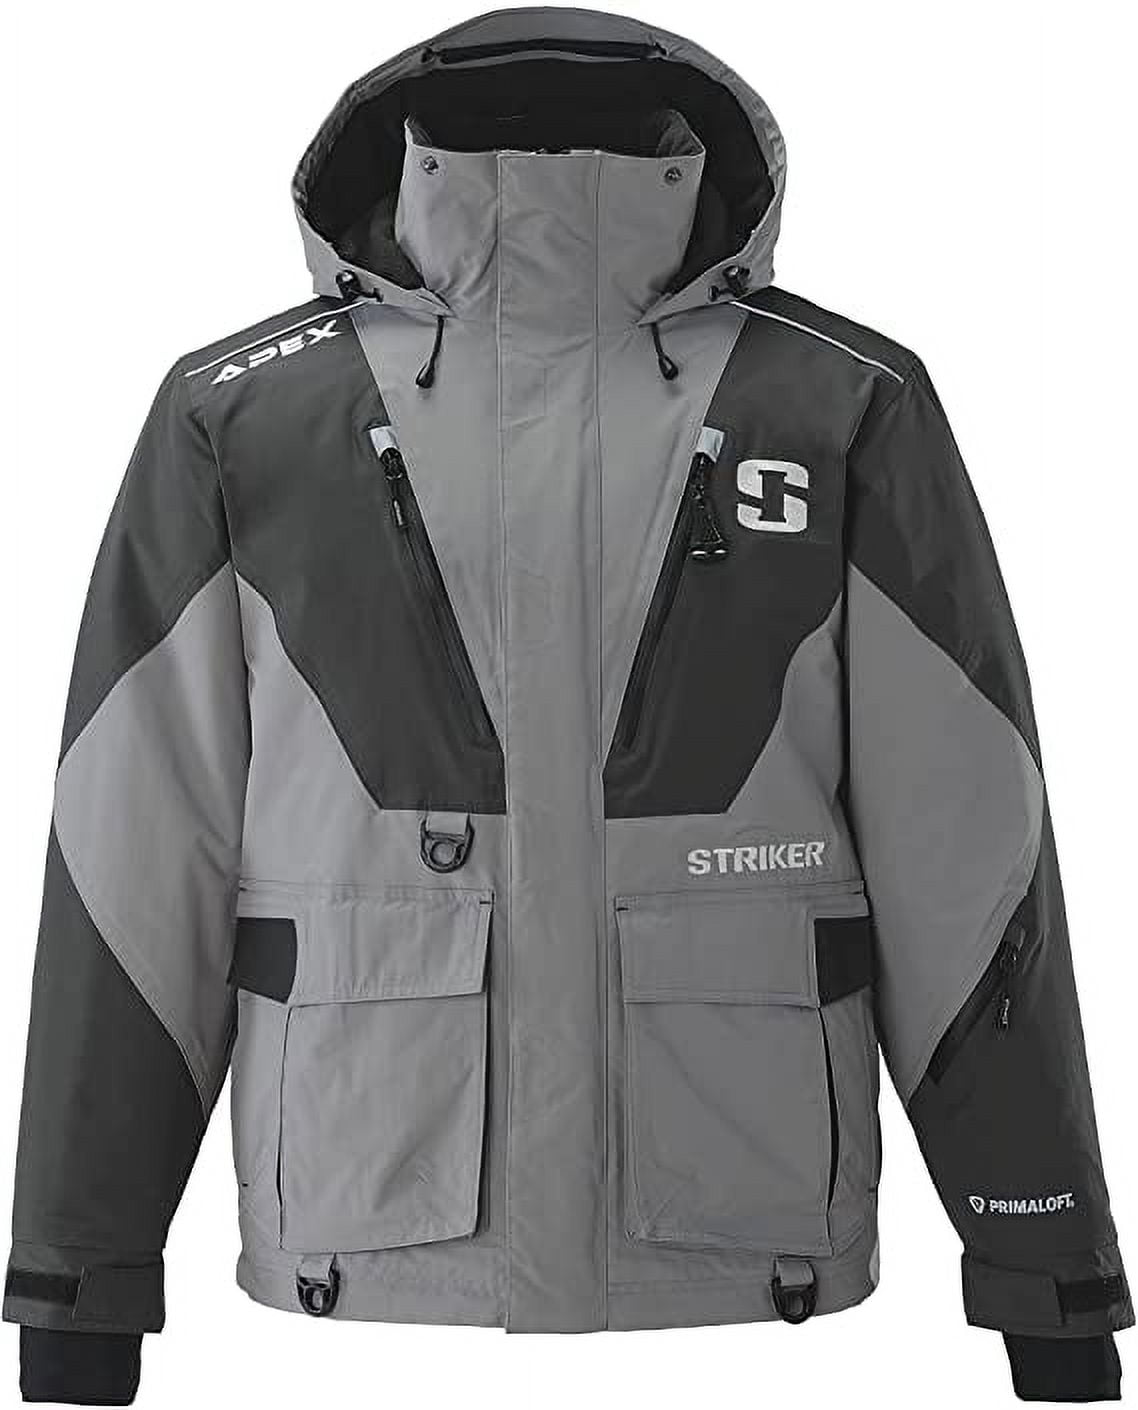 STRIKER ICE Adult Male Apex Fishing Jacket, Color: Smoke, Size: L (3212004)  